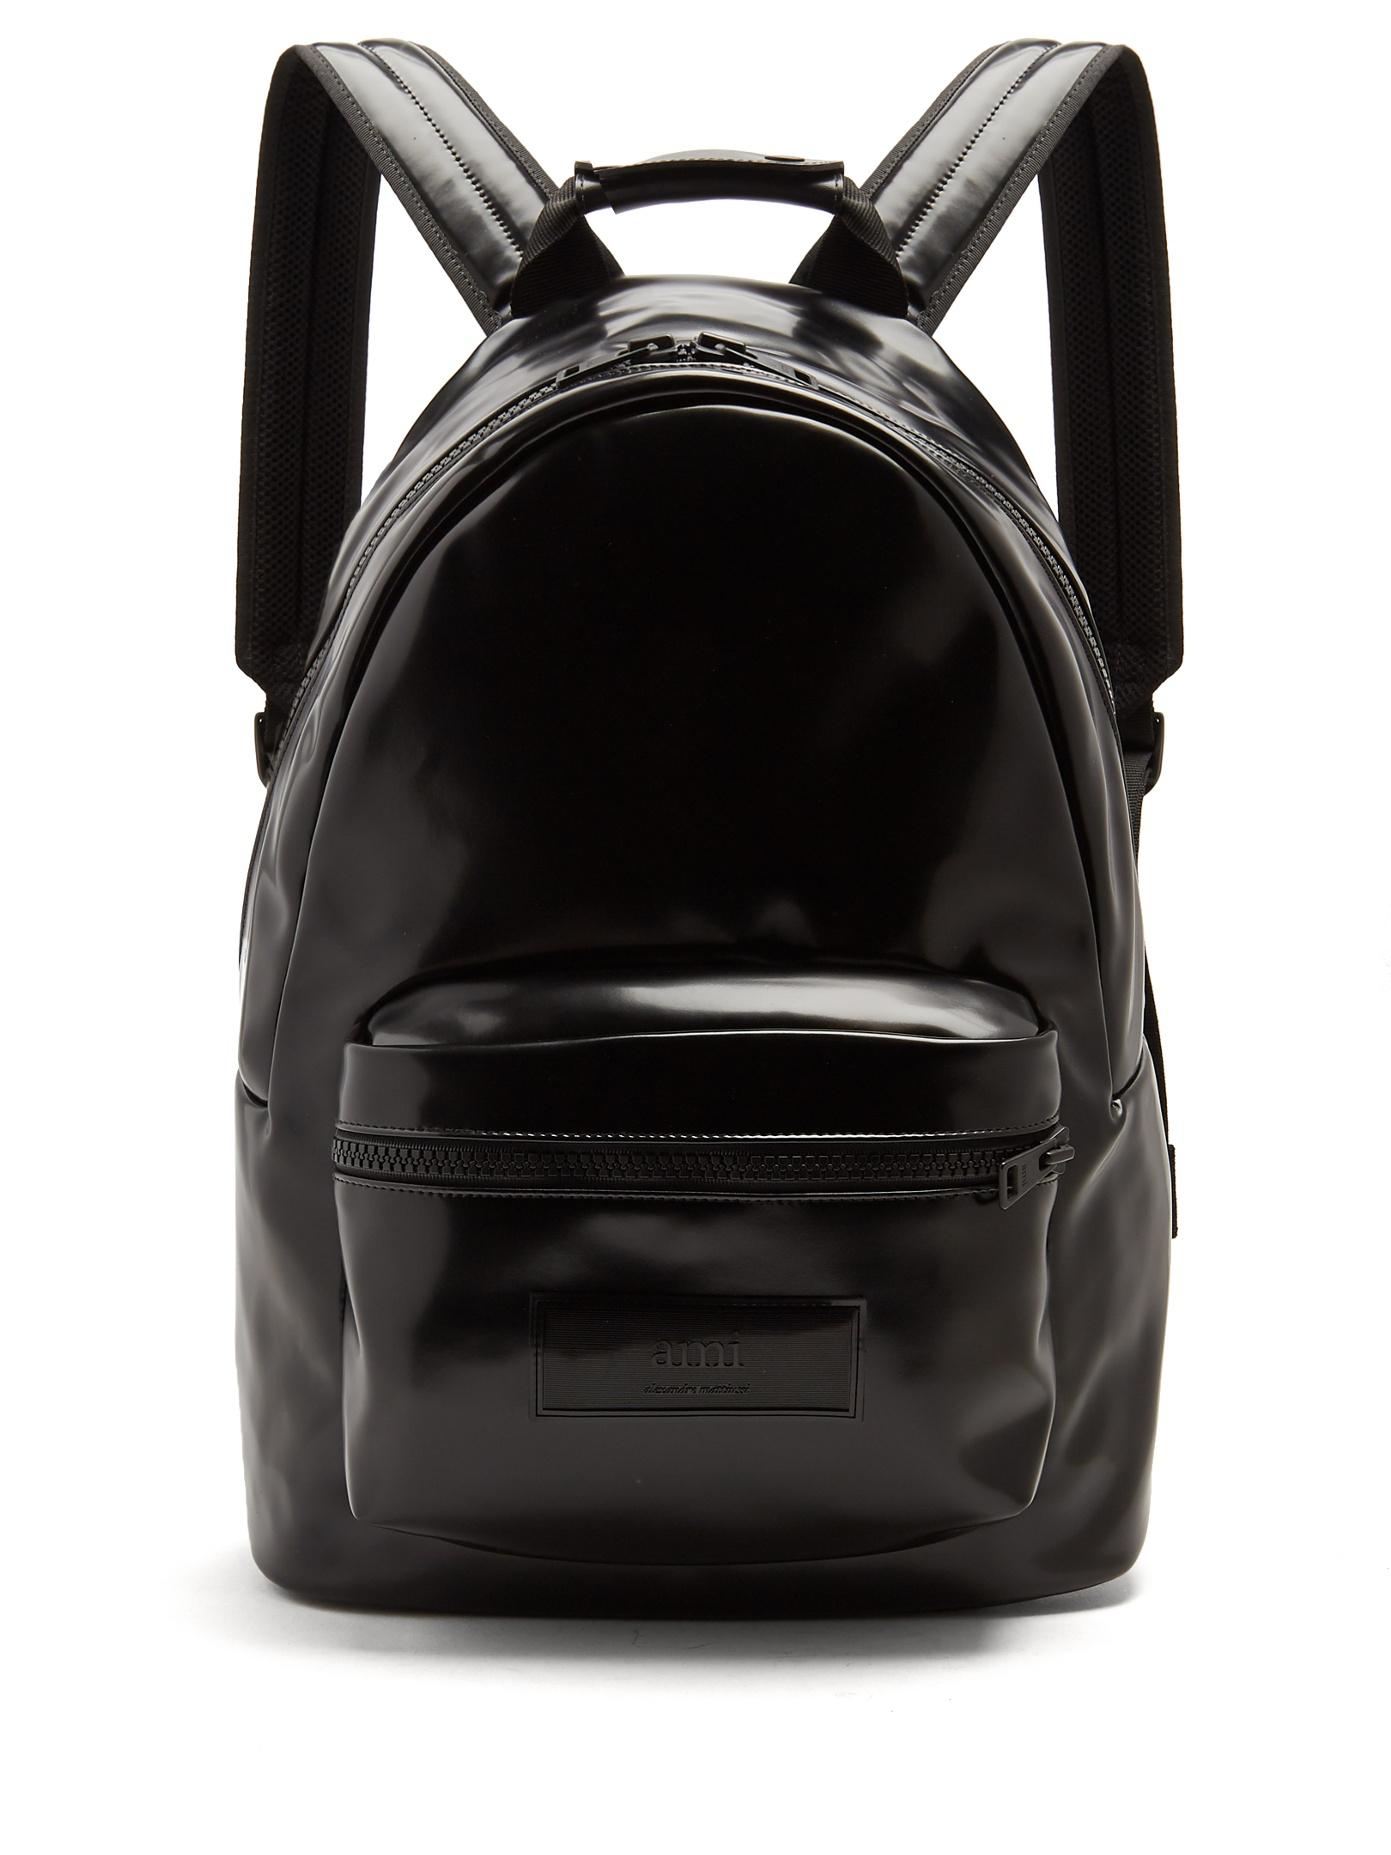 AMI Zipped Patent-leather Backpack in Black for Men - Lyst